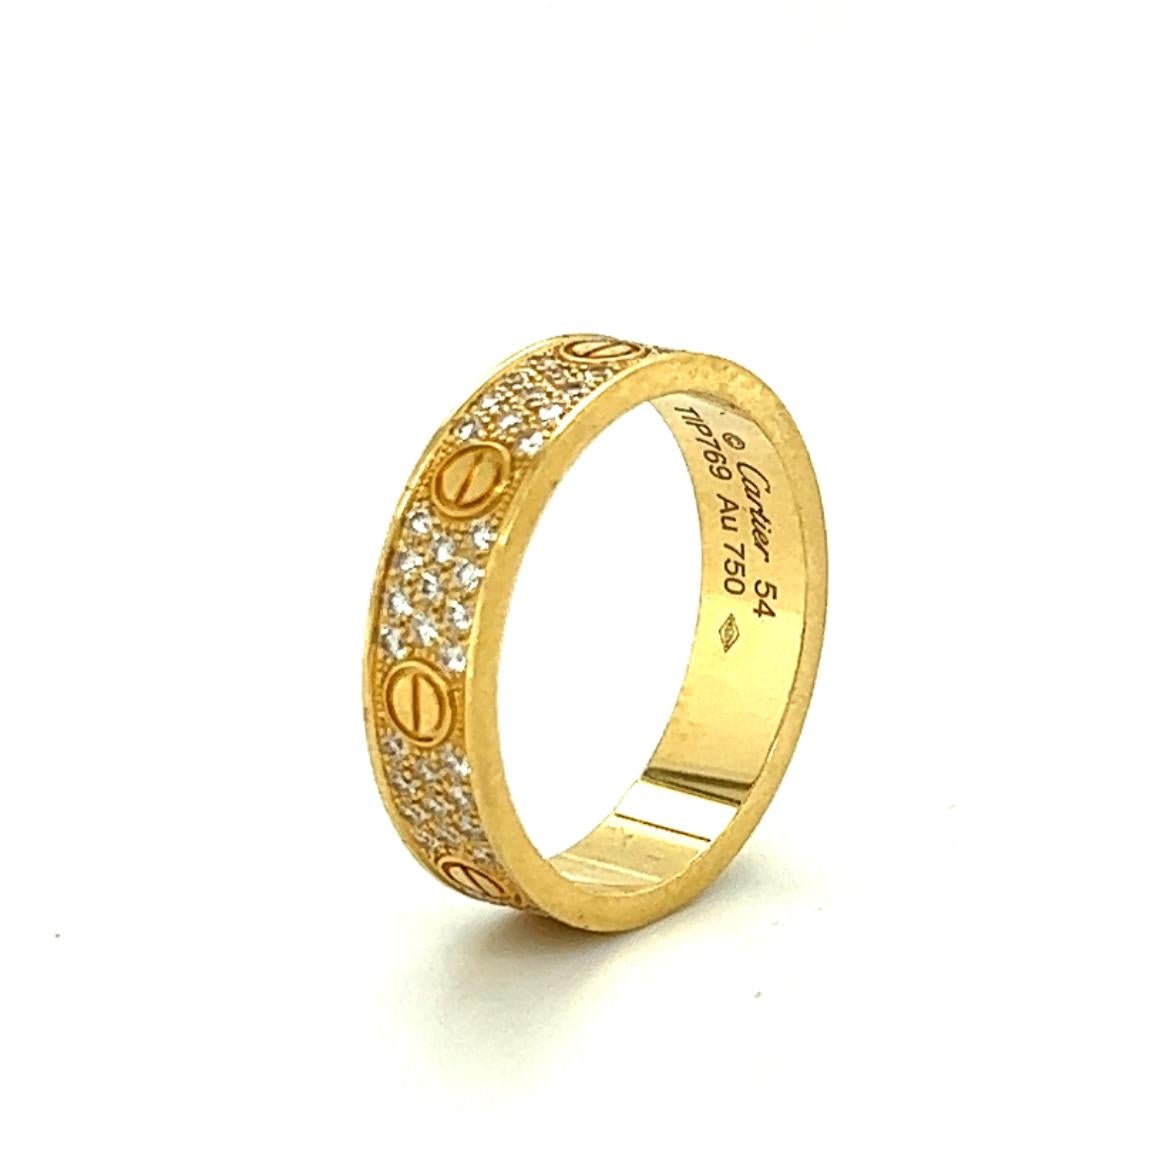 Beautiful ring crafted in 18k yellow gold. This ring is crafted by famed designer Cartier and set with 88 round brilliant cut diamonds throughout. The ring shows a 4.8 mm width and is a size 54 or 6.75.
The ring is fully hallmarked by the designer